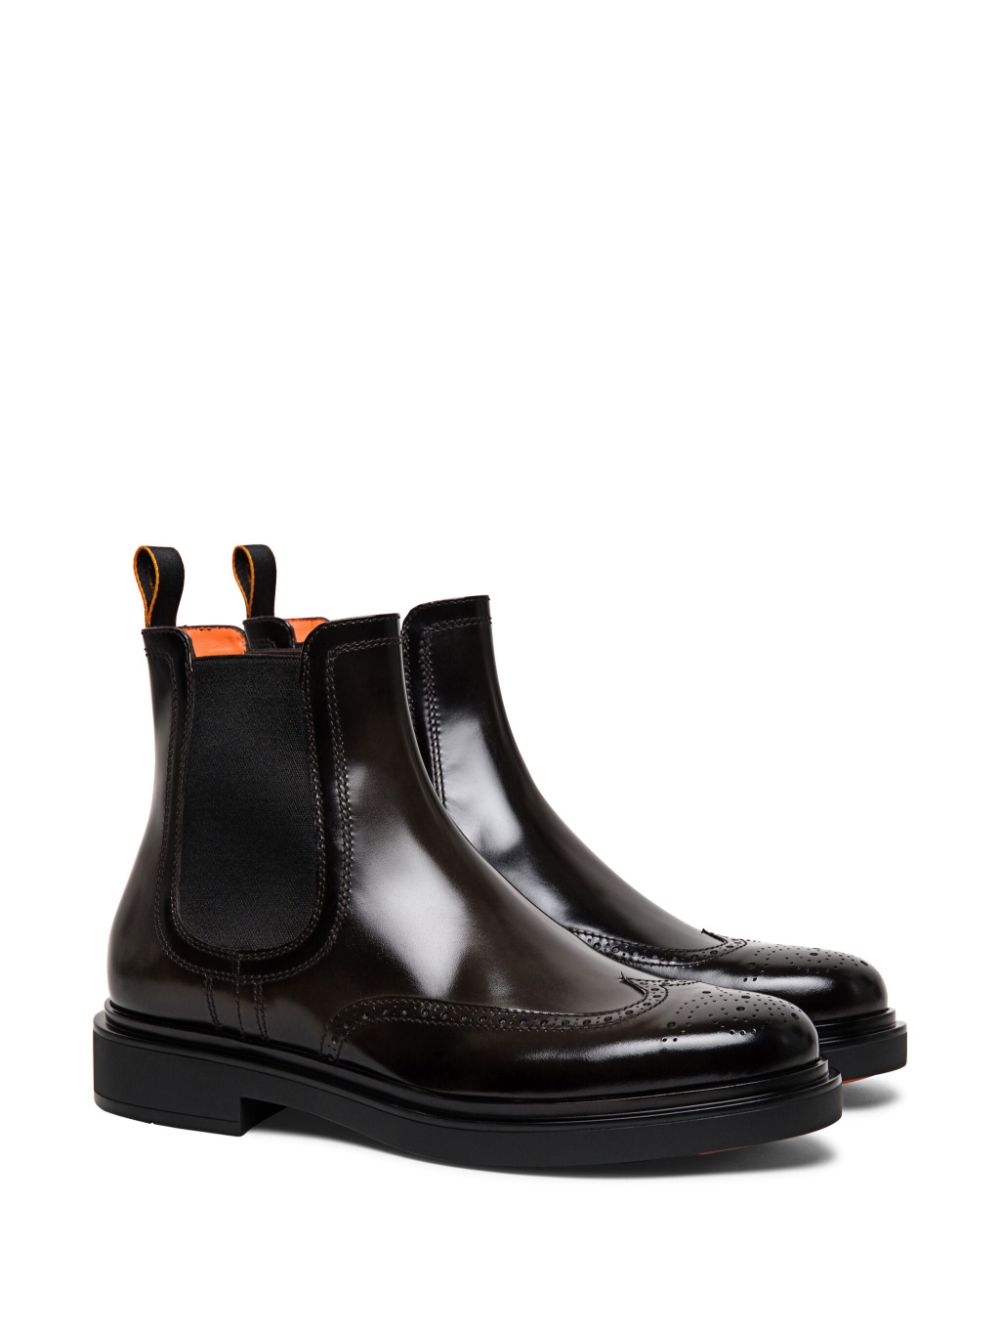 Santoni perforated leather Chelsea boots - Bruin